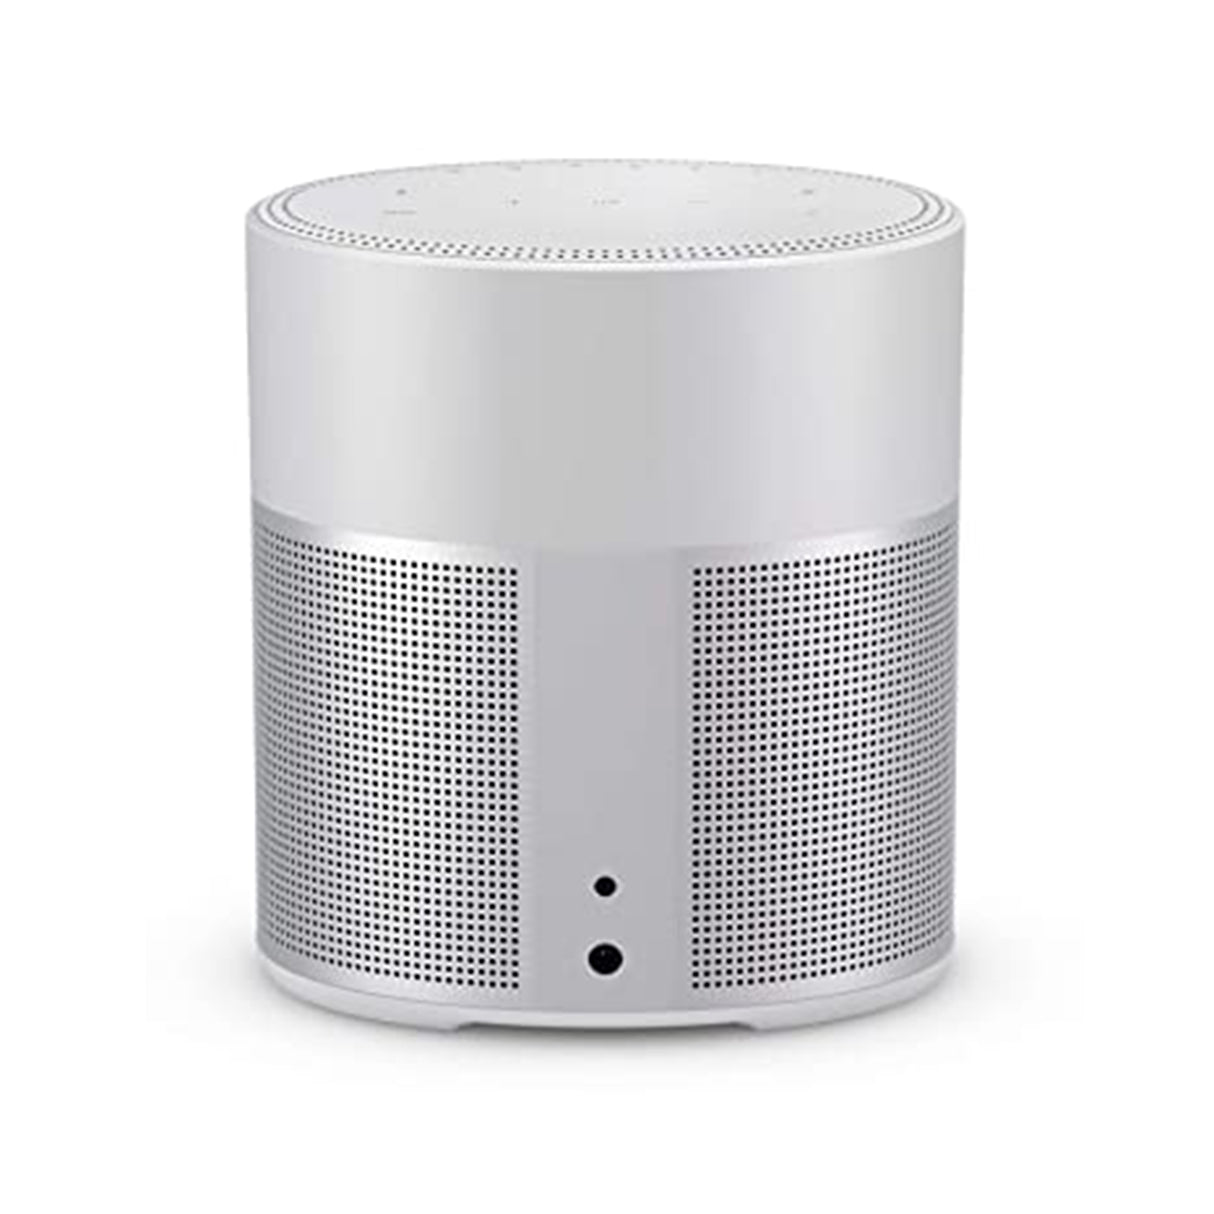 Bose Home Speaker 300 Powered speaker with Wi-Fi, Bluetooth (Demo Unit / With Box Unit) (Luxe Silver)